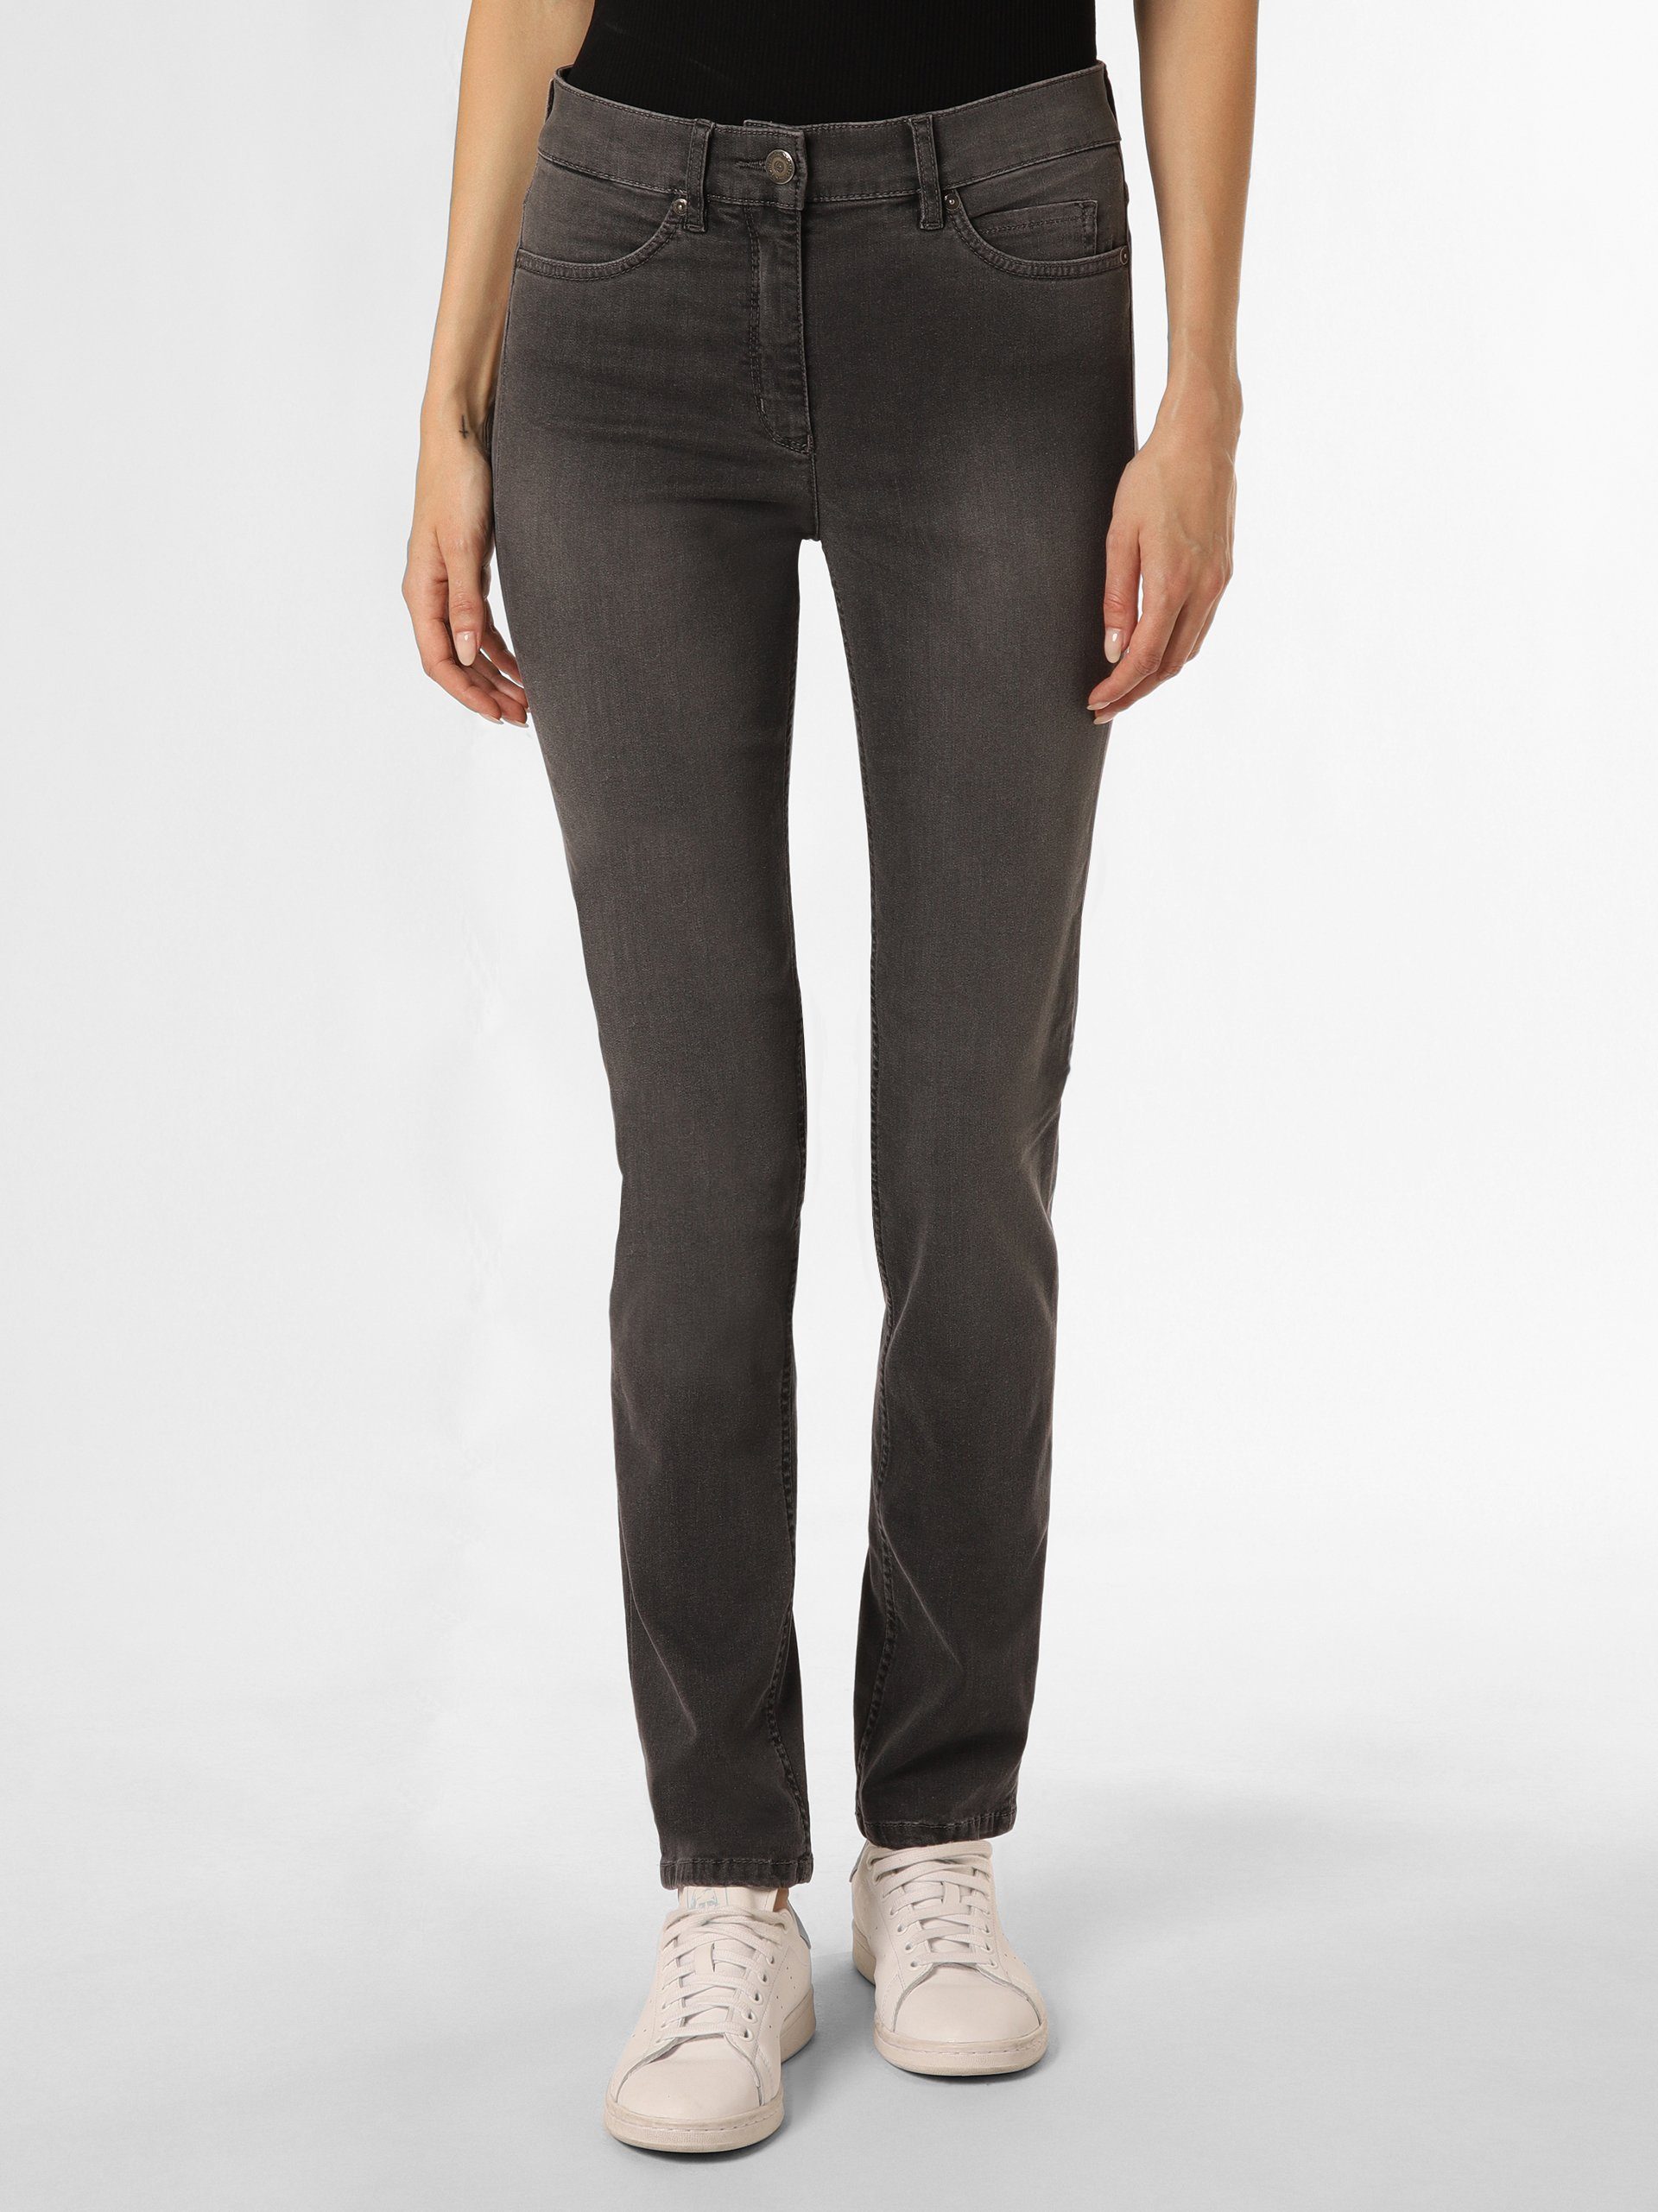 TONI Straight-Jeans Be Loved anthrazit | Slim-Fit Jeans